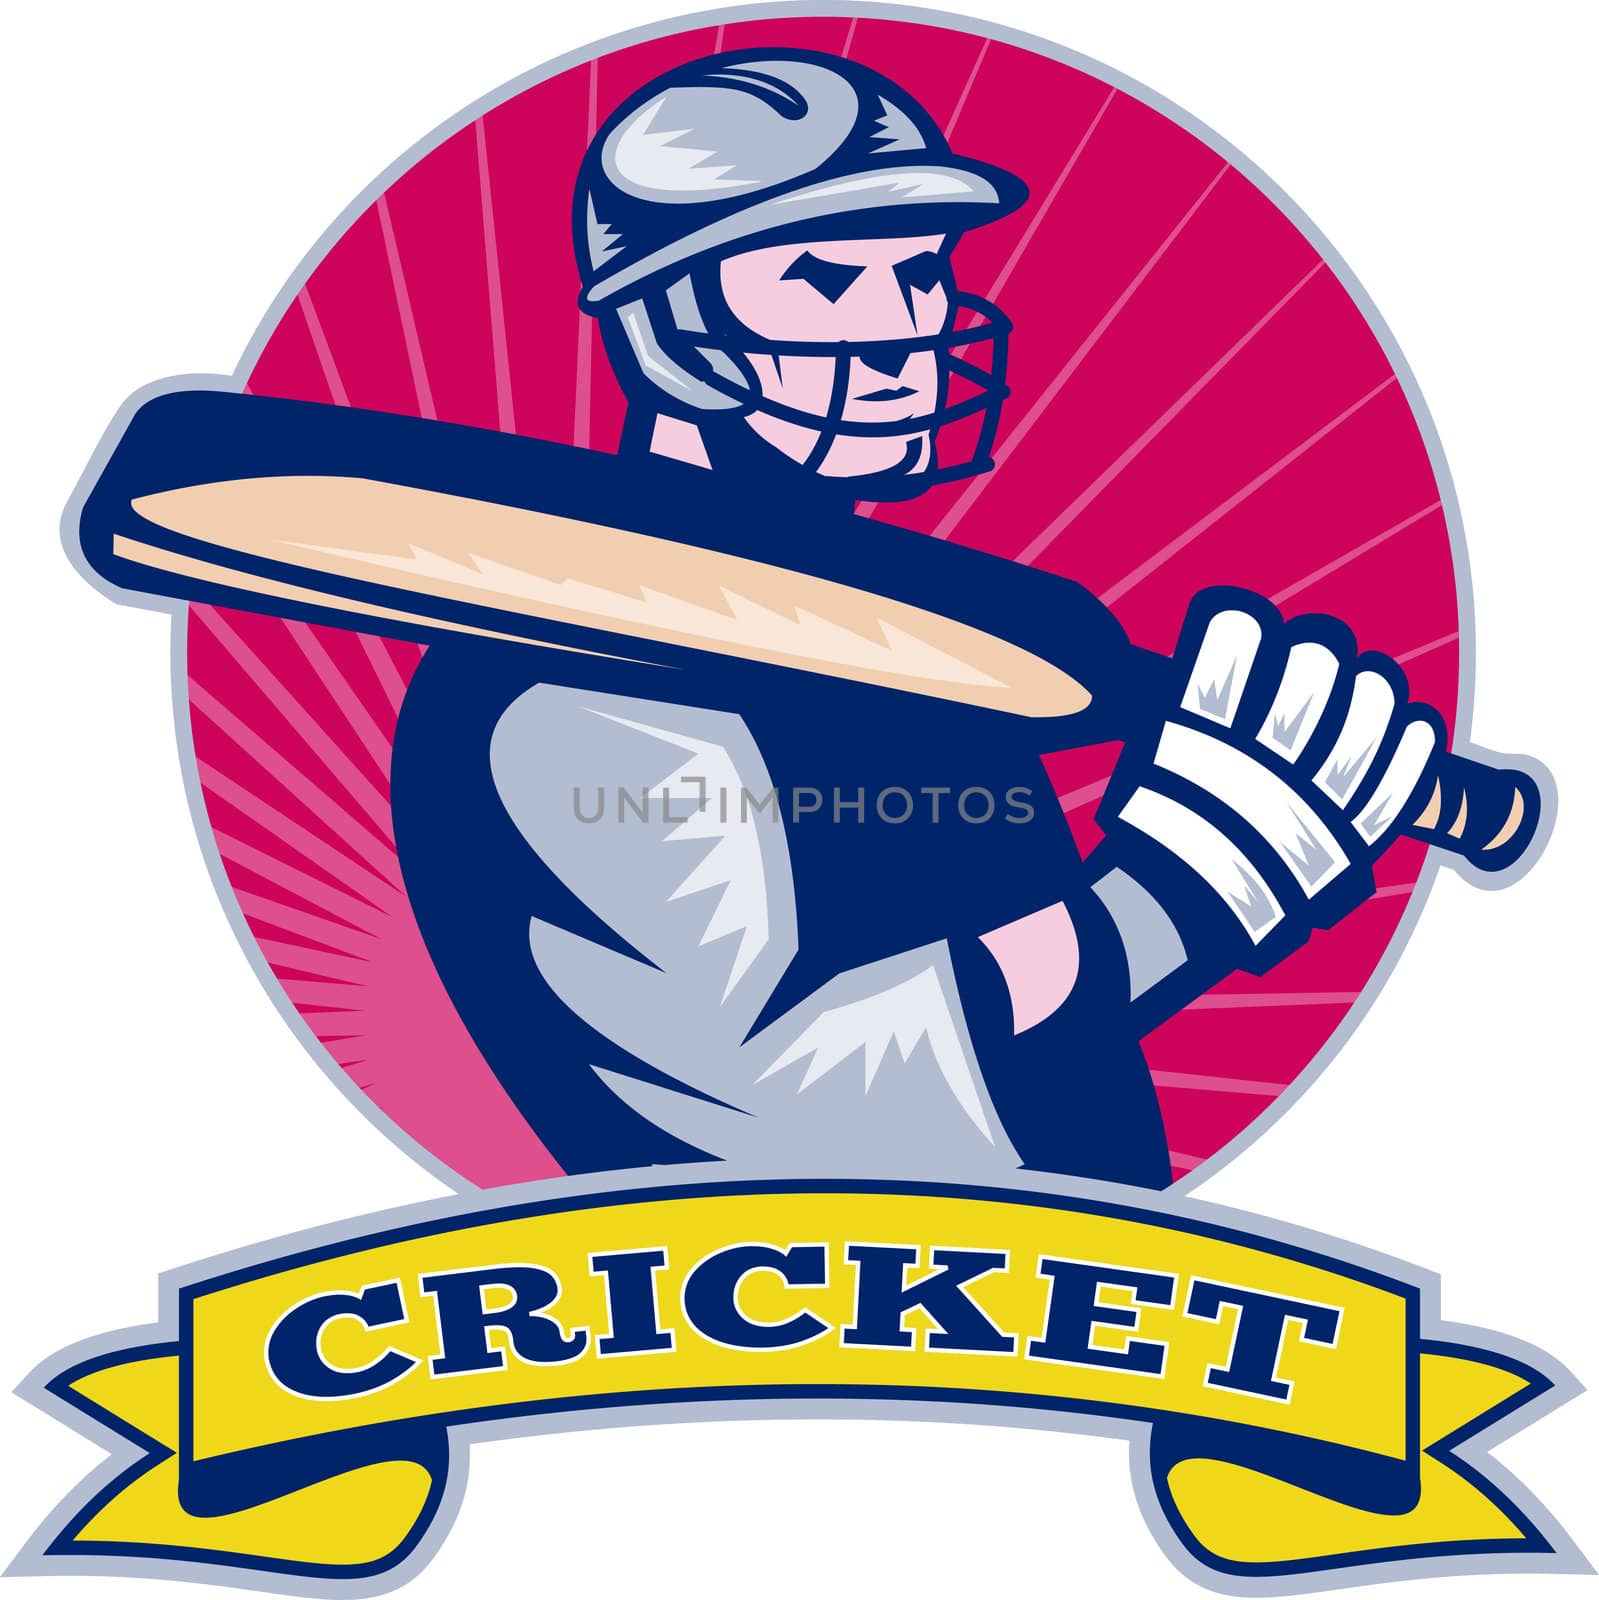  illustration of a cricket batsman with bat side view with sunburst in background done in retro style